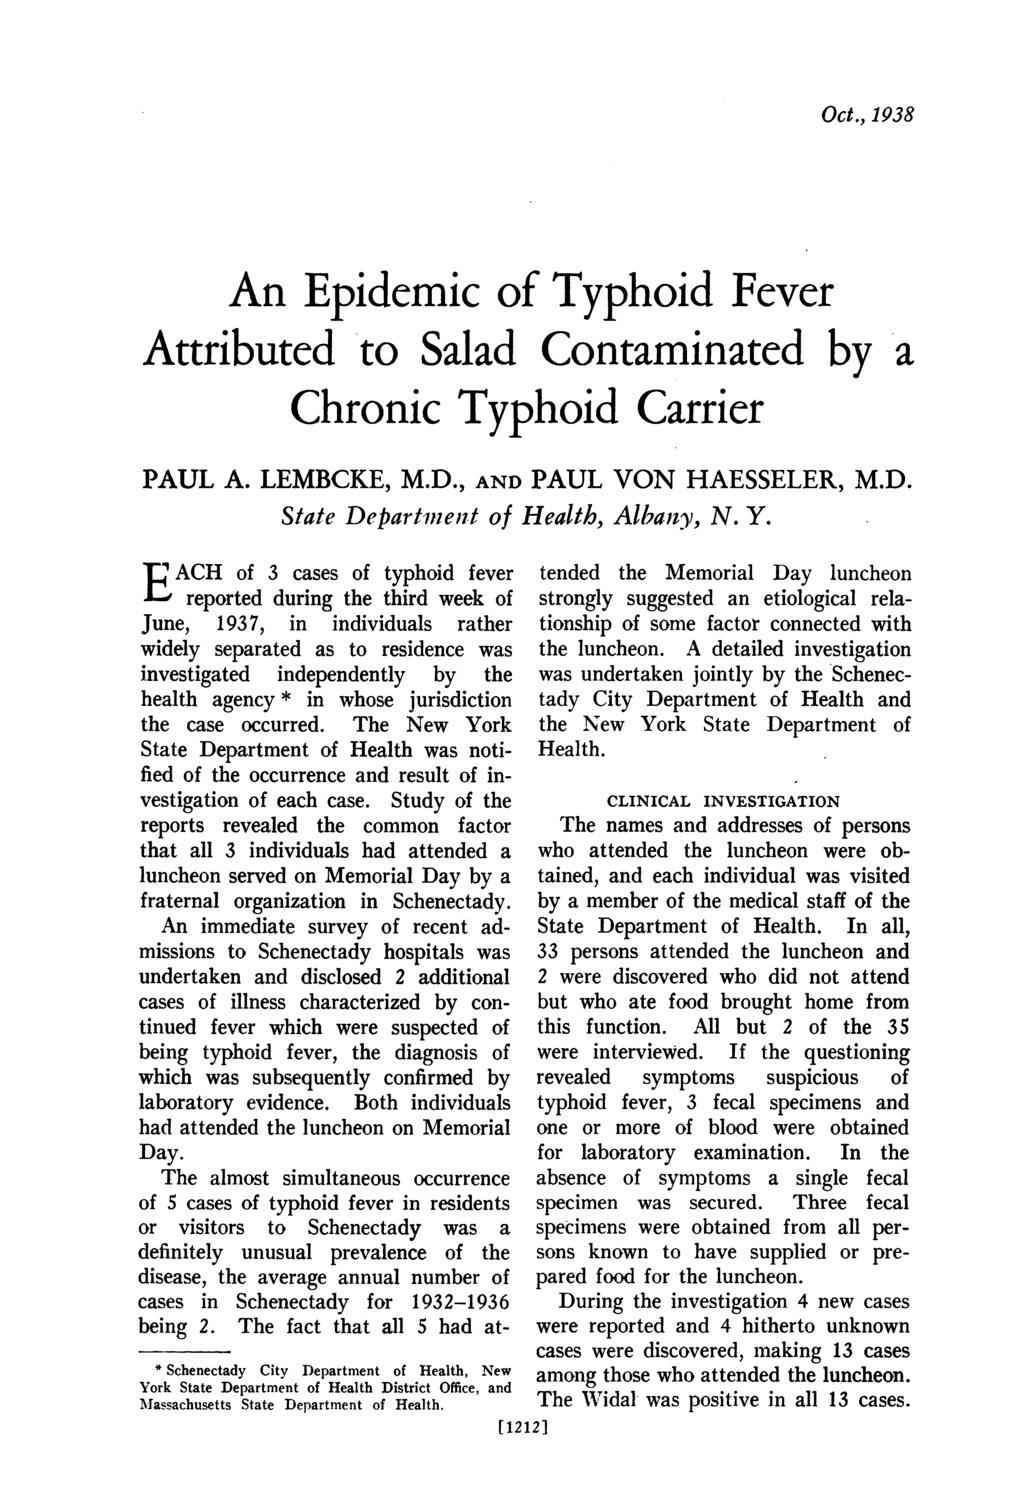 Oct., 138 An Epidemic of Typhoid Fever Attributed to Salad Contaminated by a Chronic Typhoid Carrier PAUL A. LEMBCKE, M.D., AND PAUL VON HAESSELER, M.D. State Department of Health, Albany, N. Y.